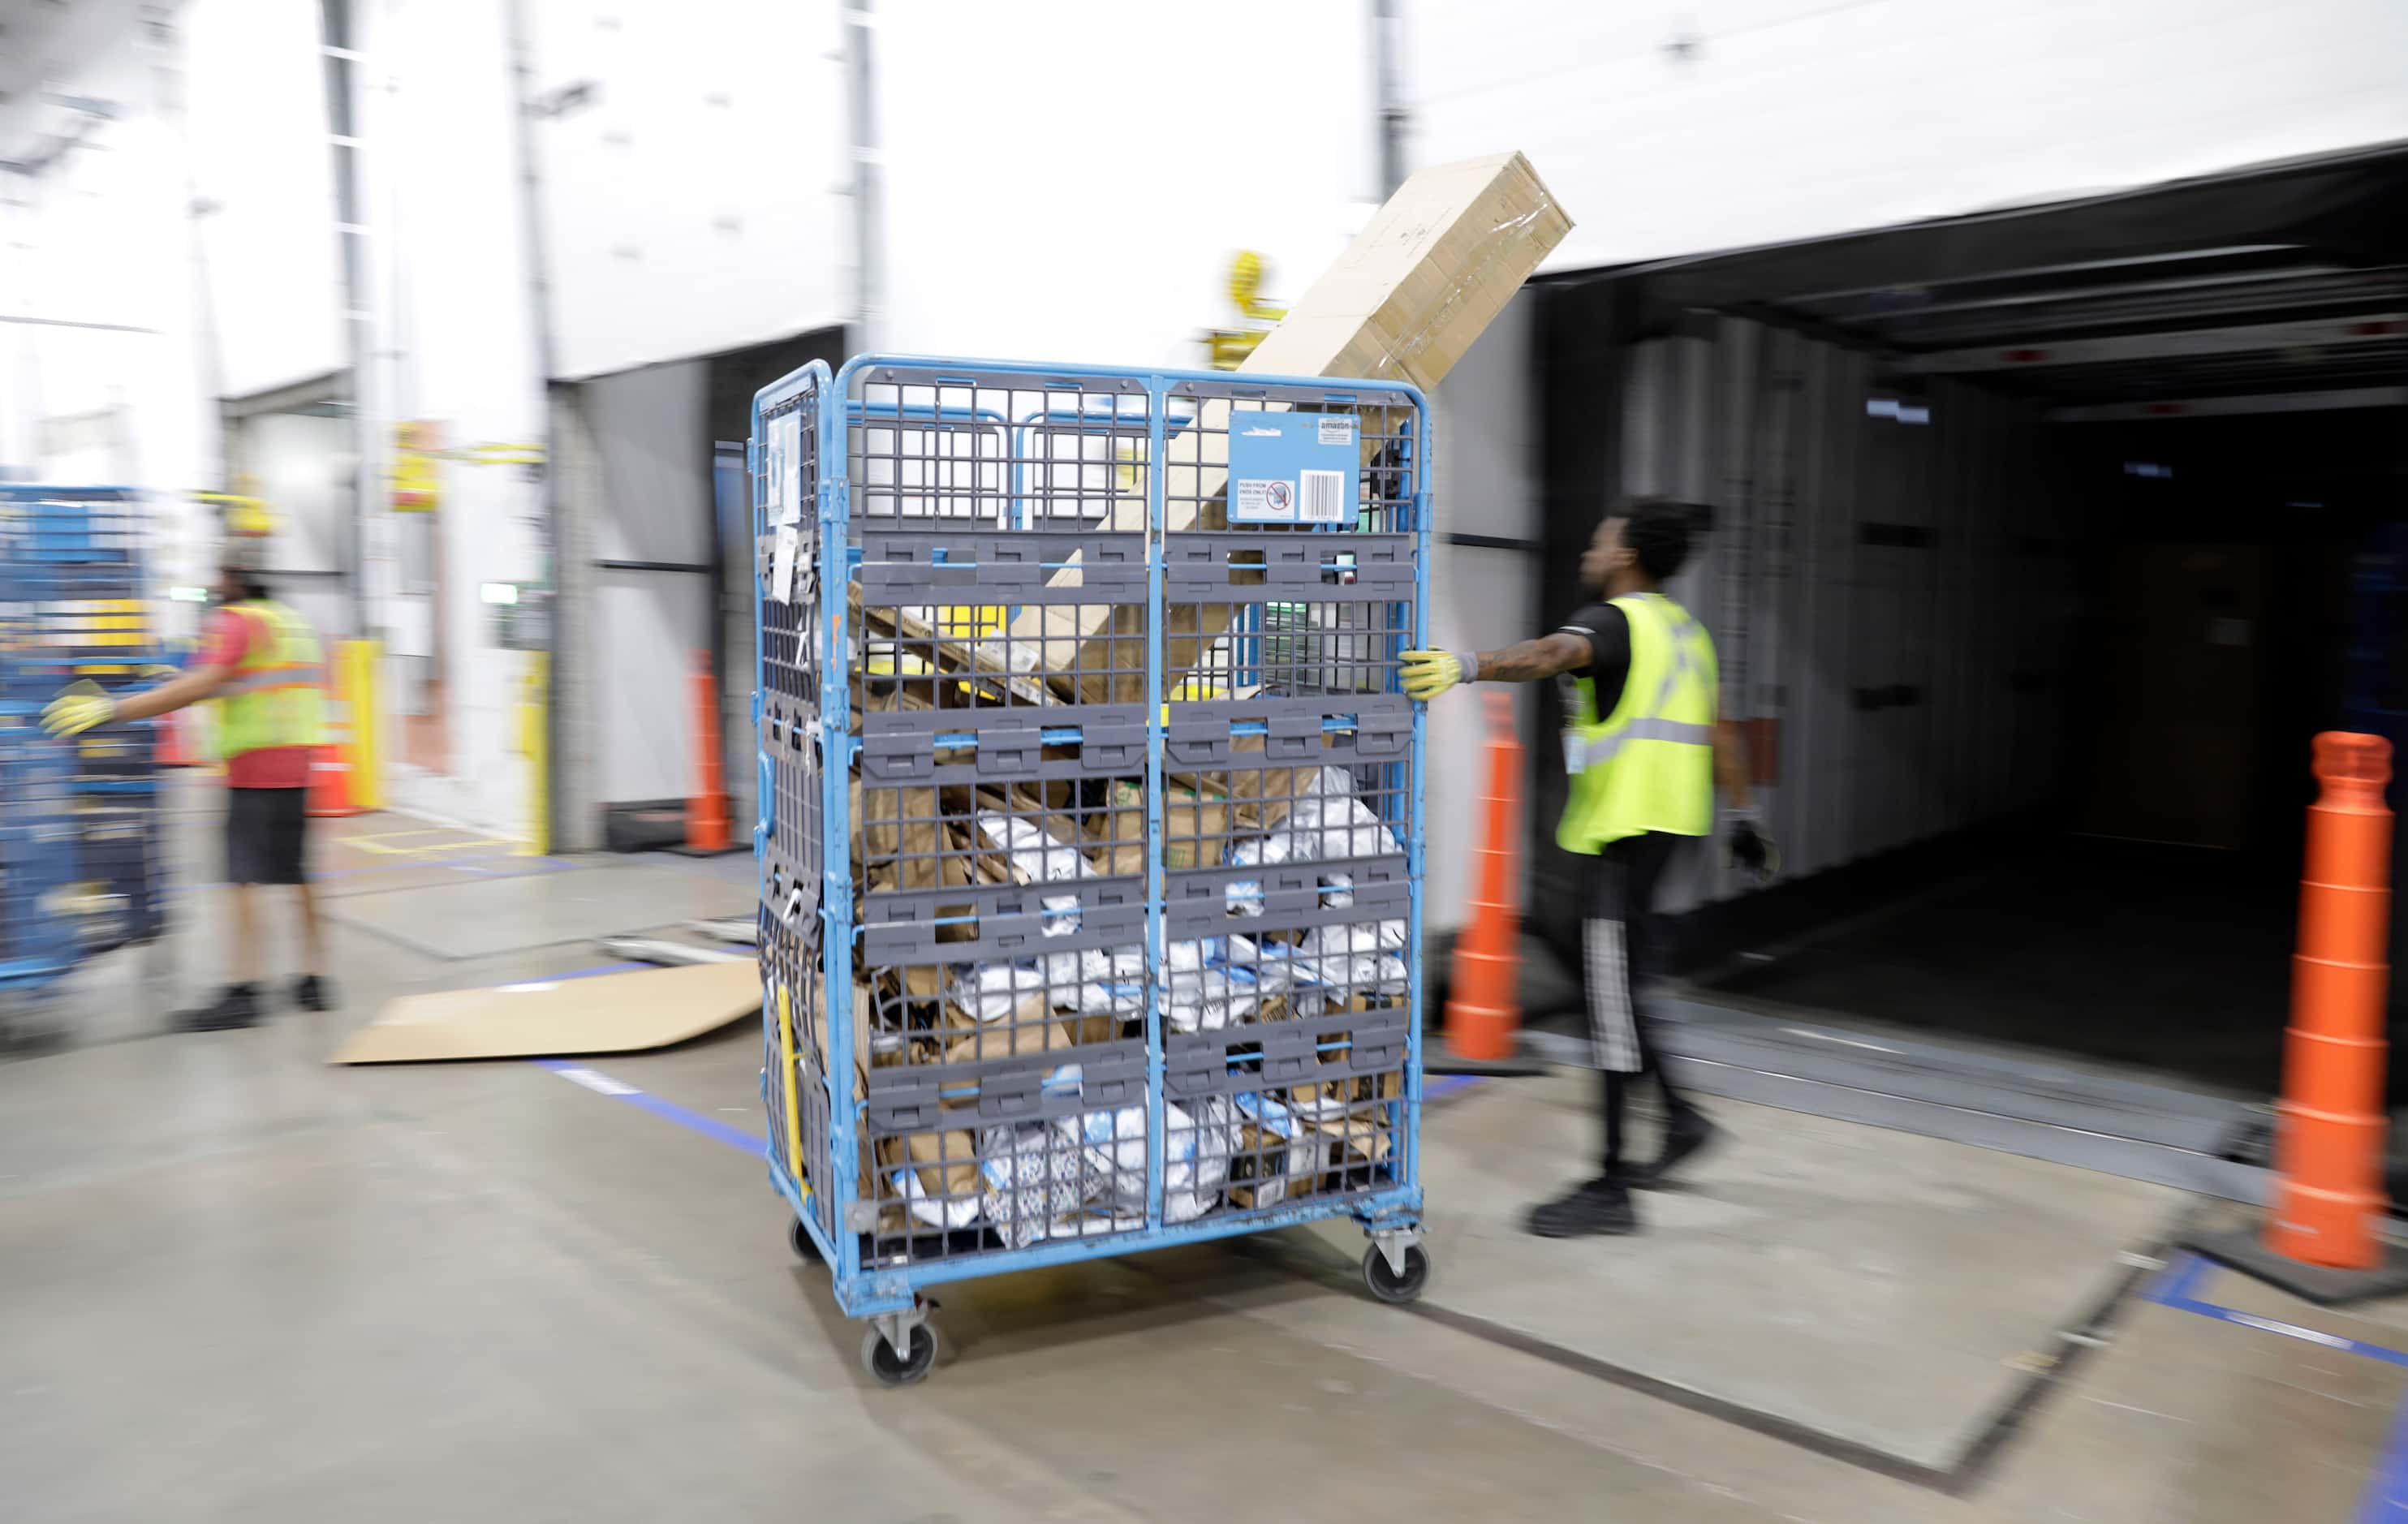 A crew member unloads a semi-truck full of early PRIME day deal packages as they arrive via...